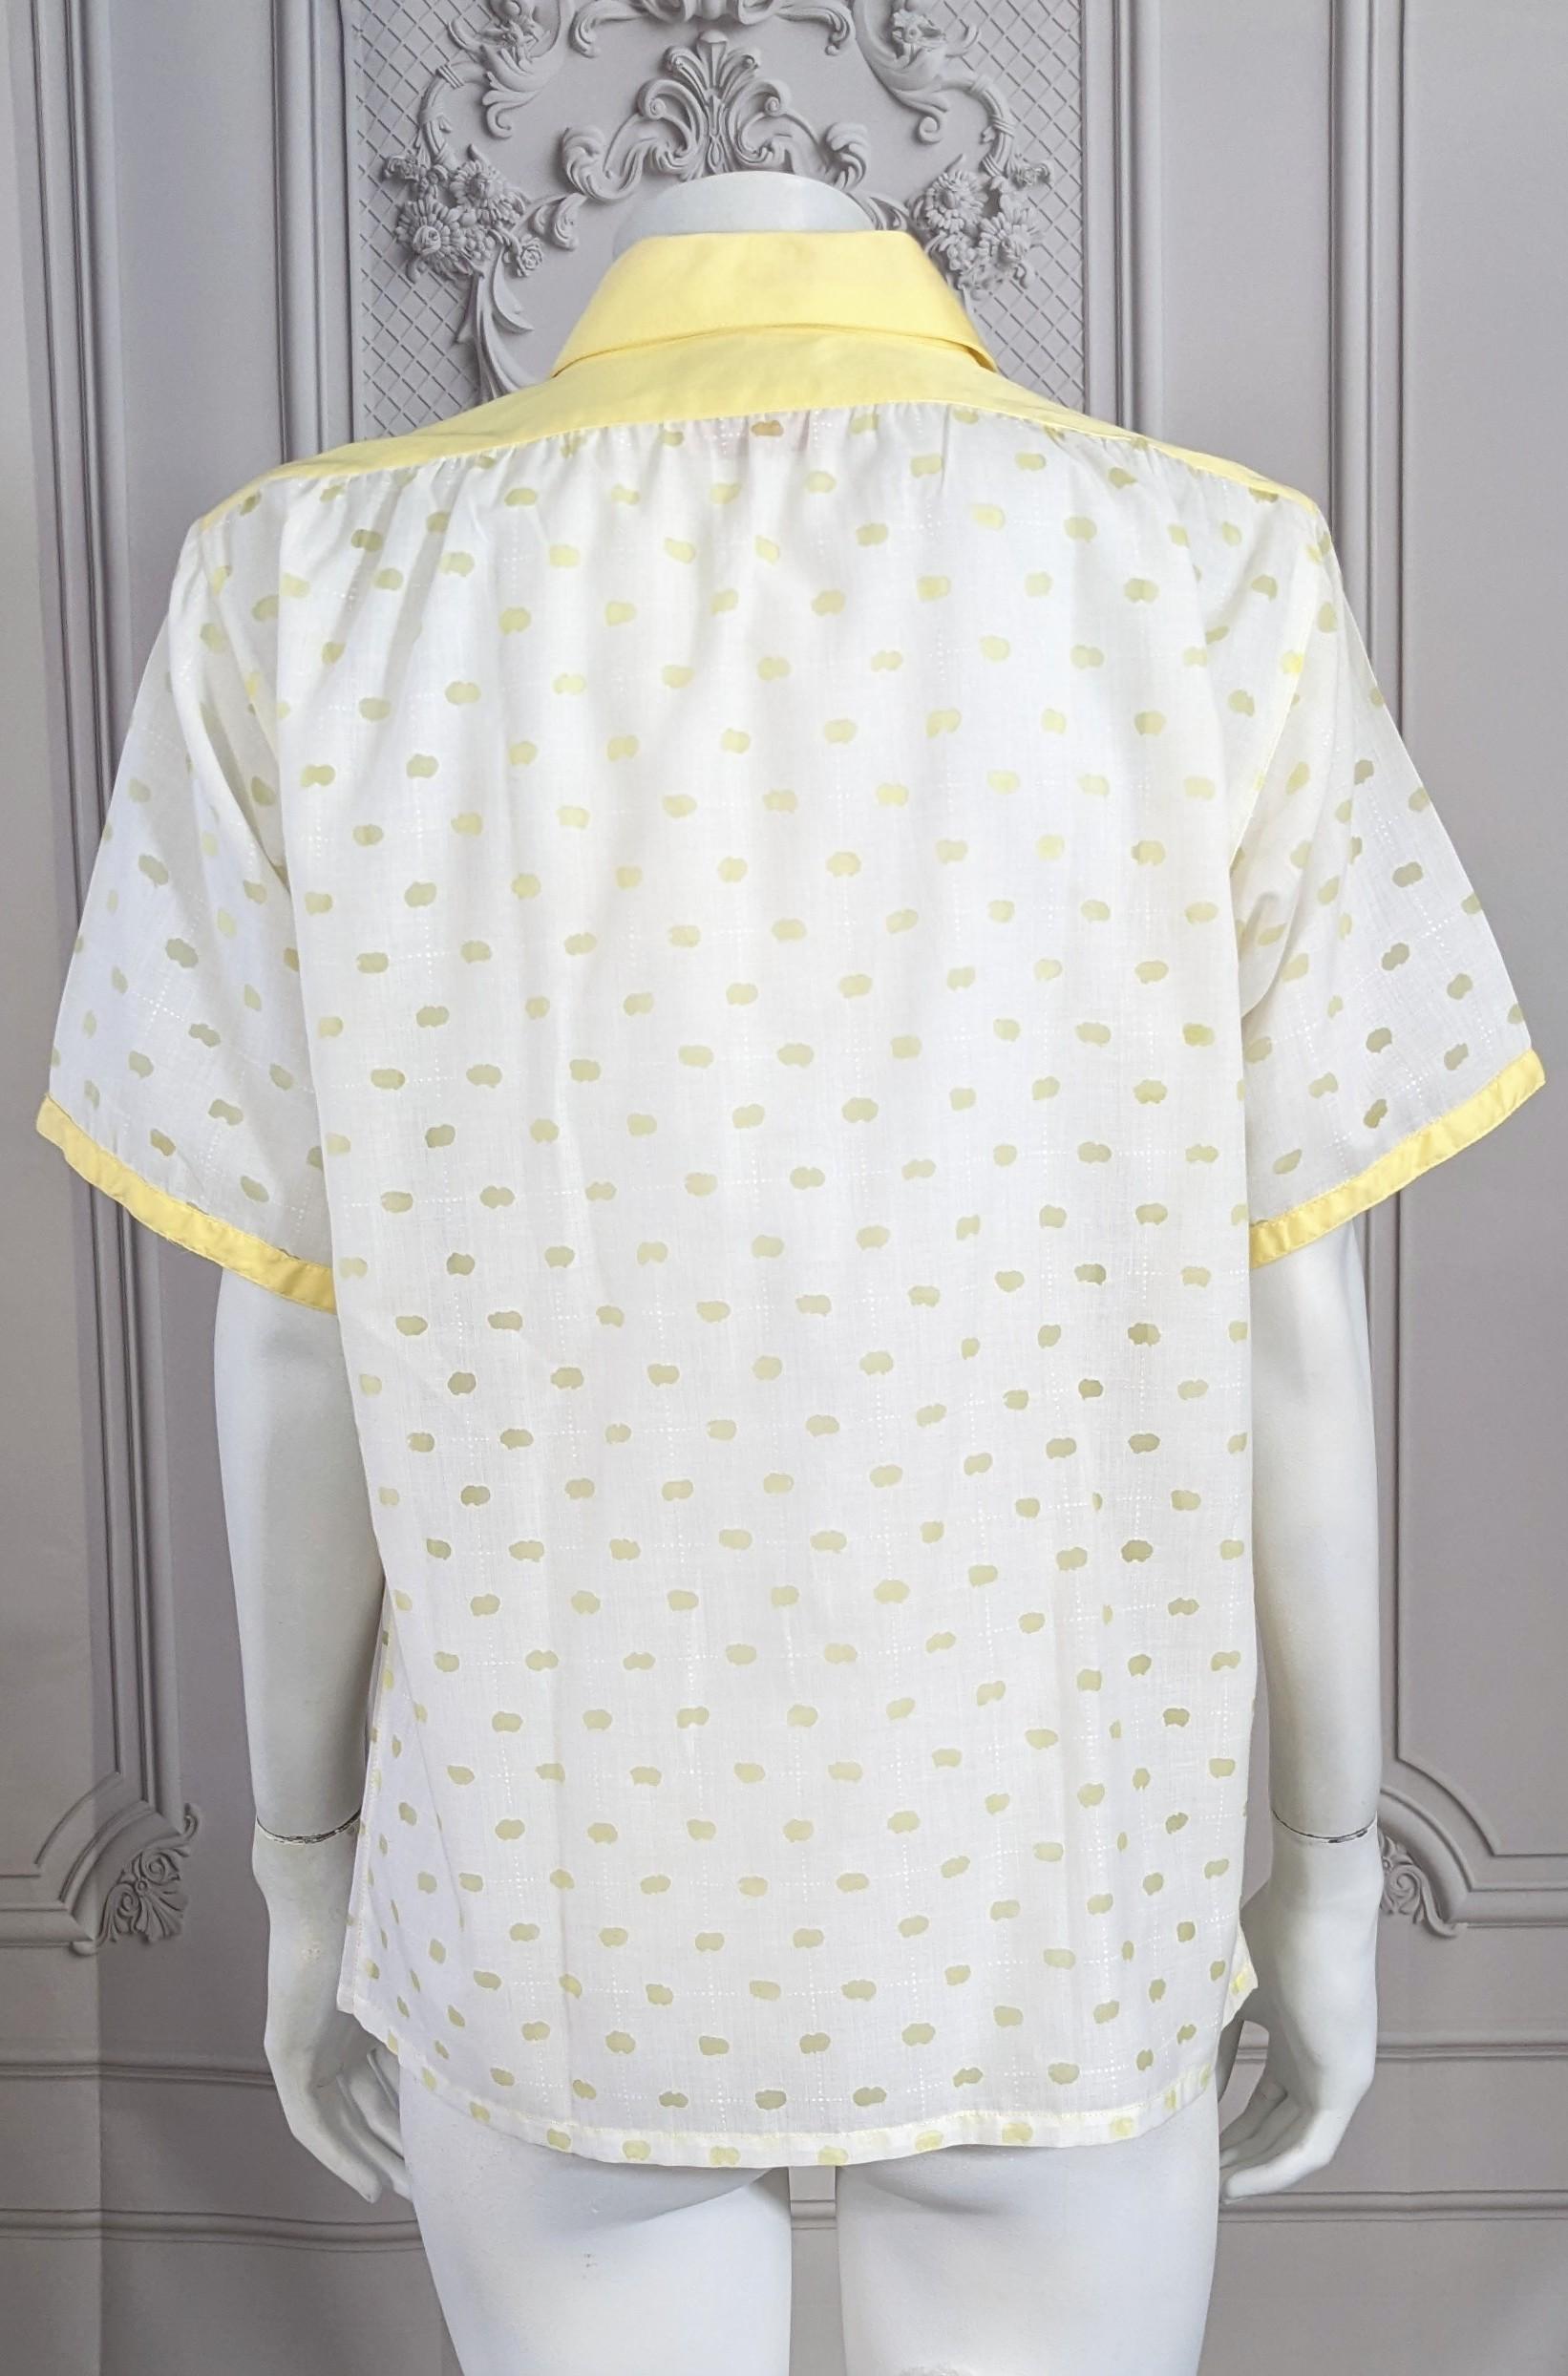 Women's Andre Courreges Yellow Cloud Voided Blouse For Sale